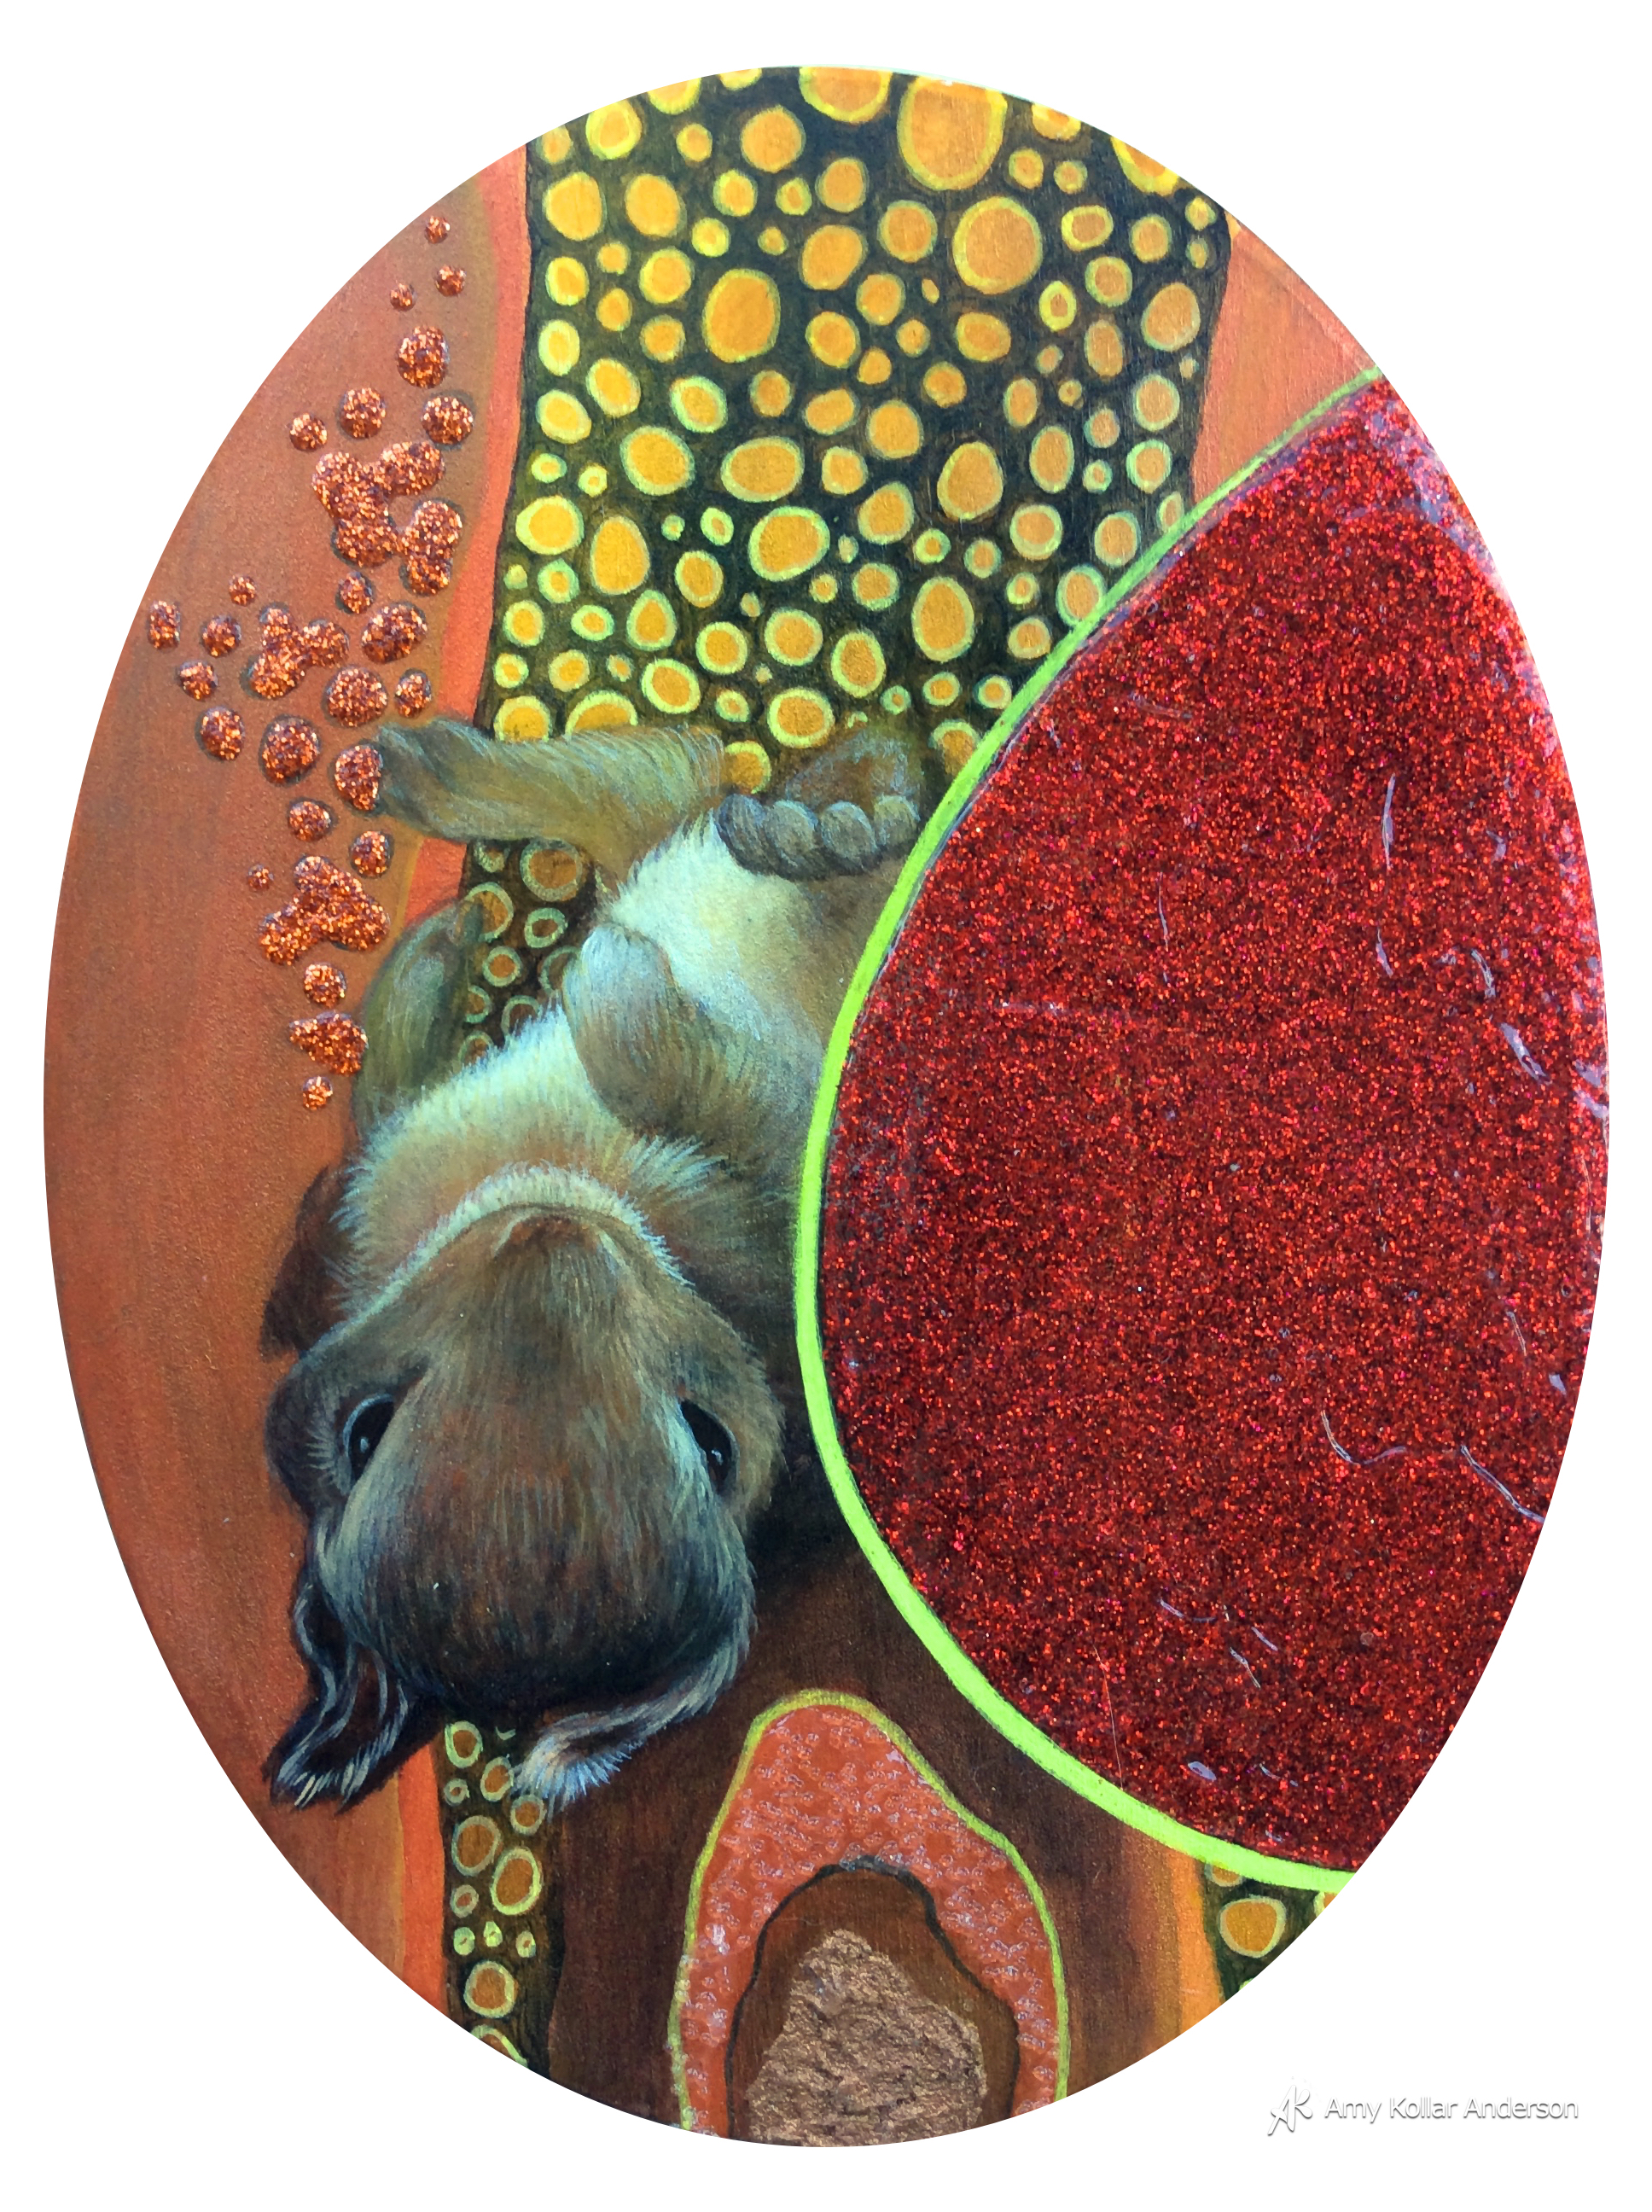     Baby Bunny  &nbsp;: acrylic paint, glitter, gel medium,&nbsp;lava paste, and glass beads : 6" x 8" x 1" :&nbsp;2015 Collection of C. and R. Riordan  